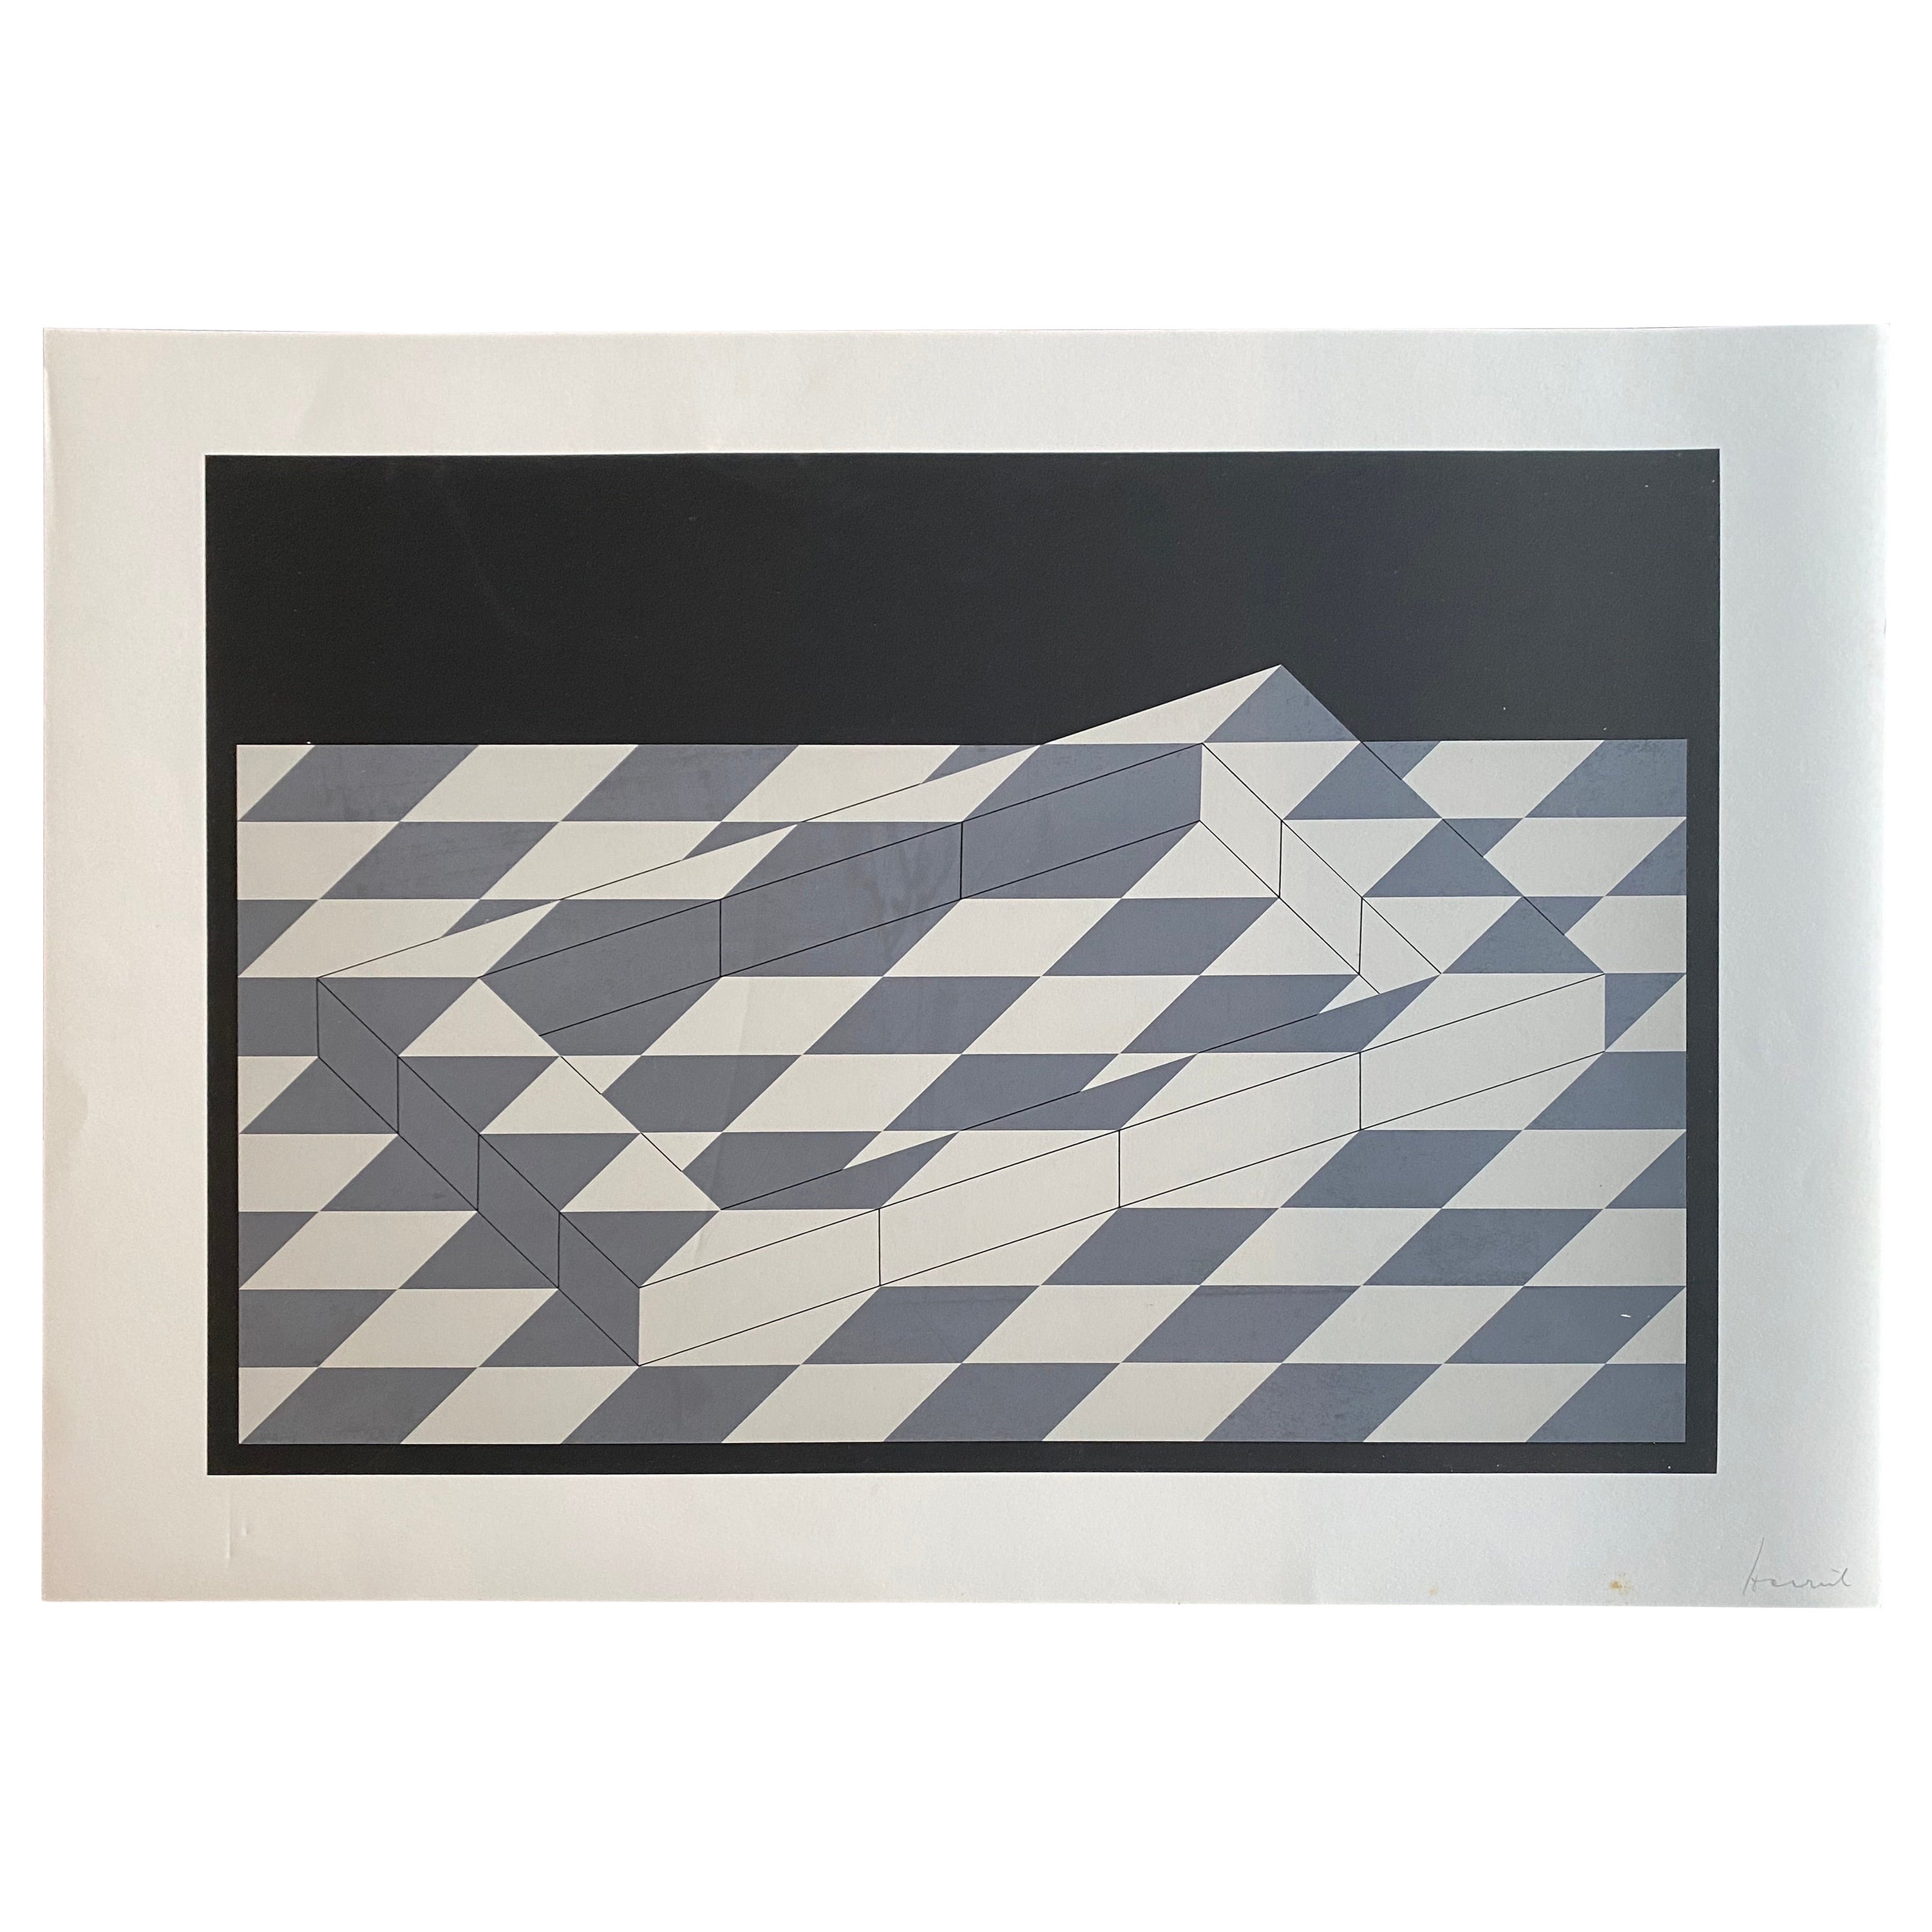  Original serigraph on white cardboard, signed by Erwin Heerich For Sale